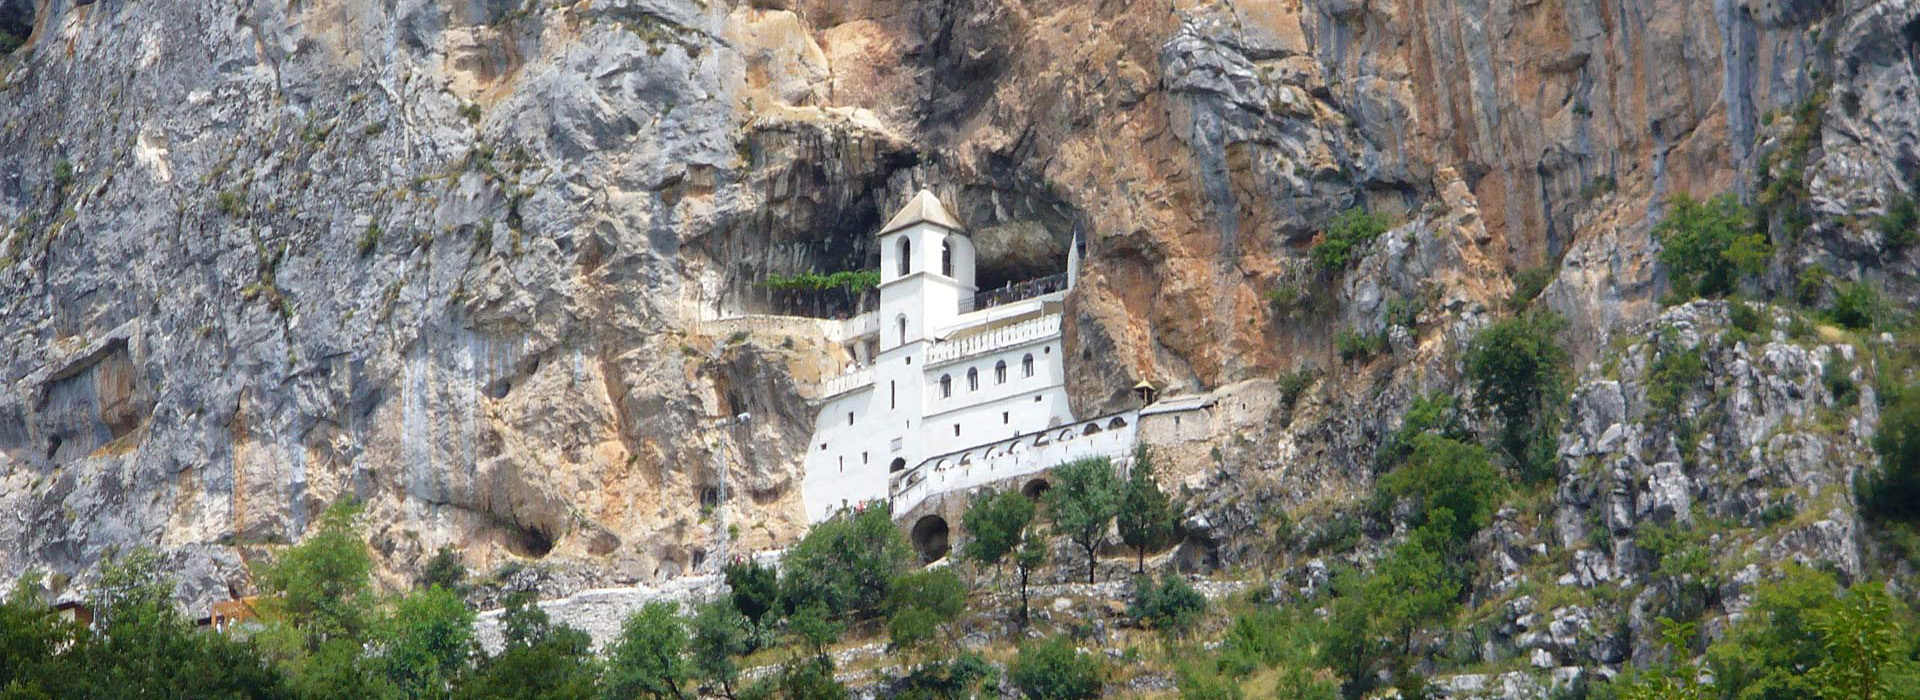 Montenegro walking self-guided holiday - Ostrog monastery